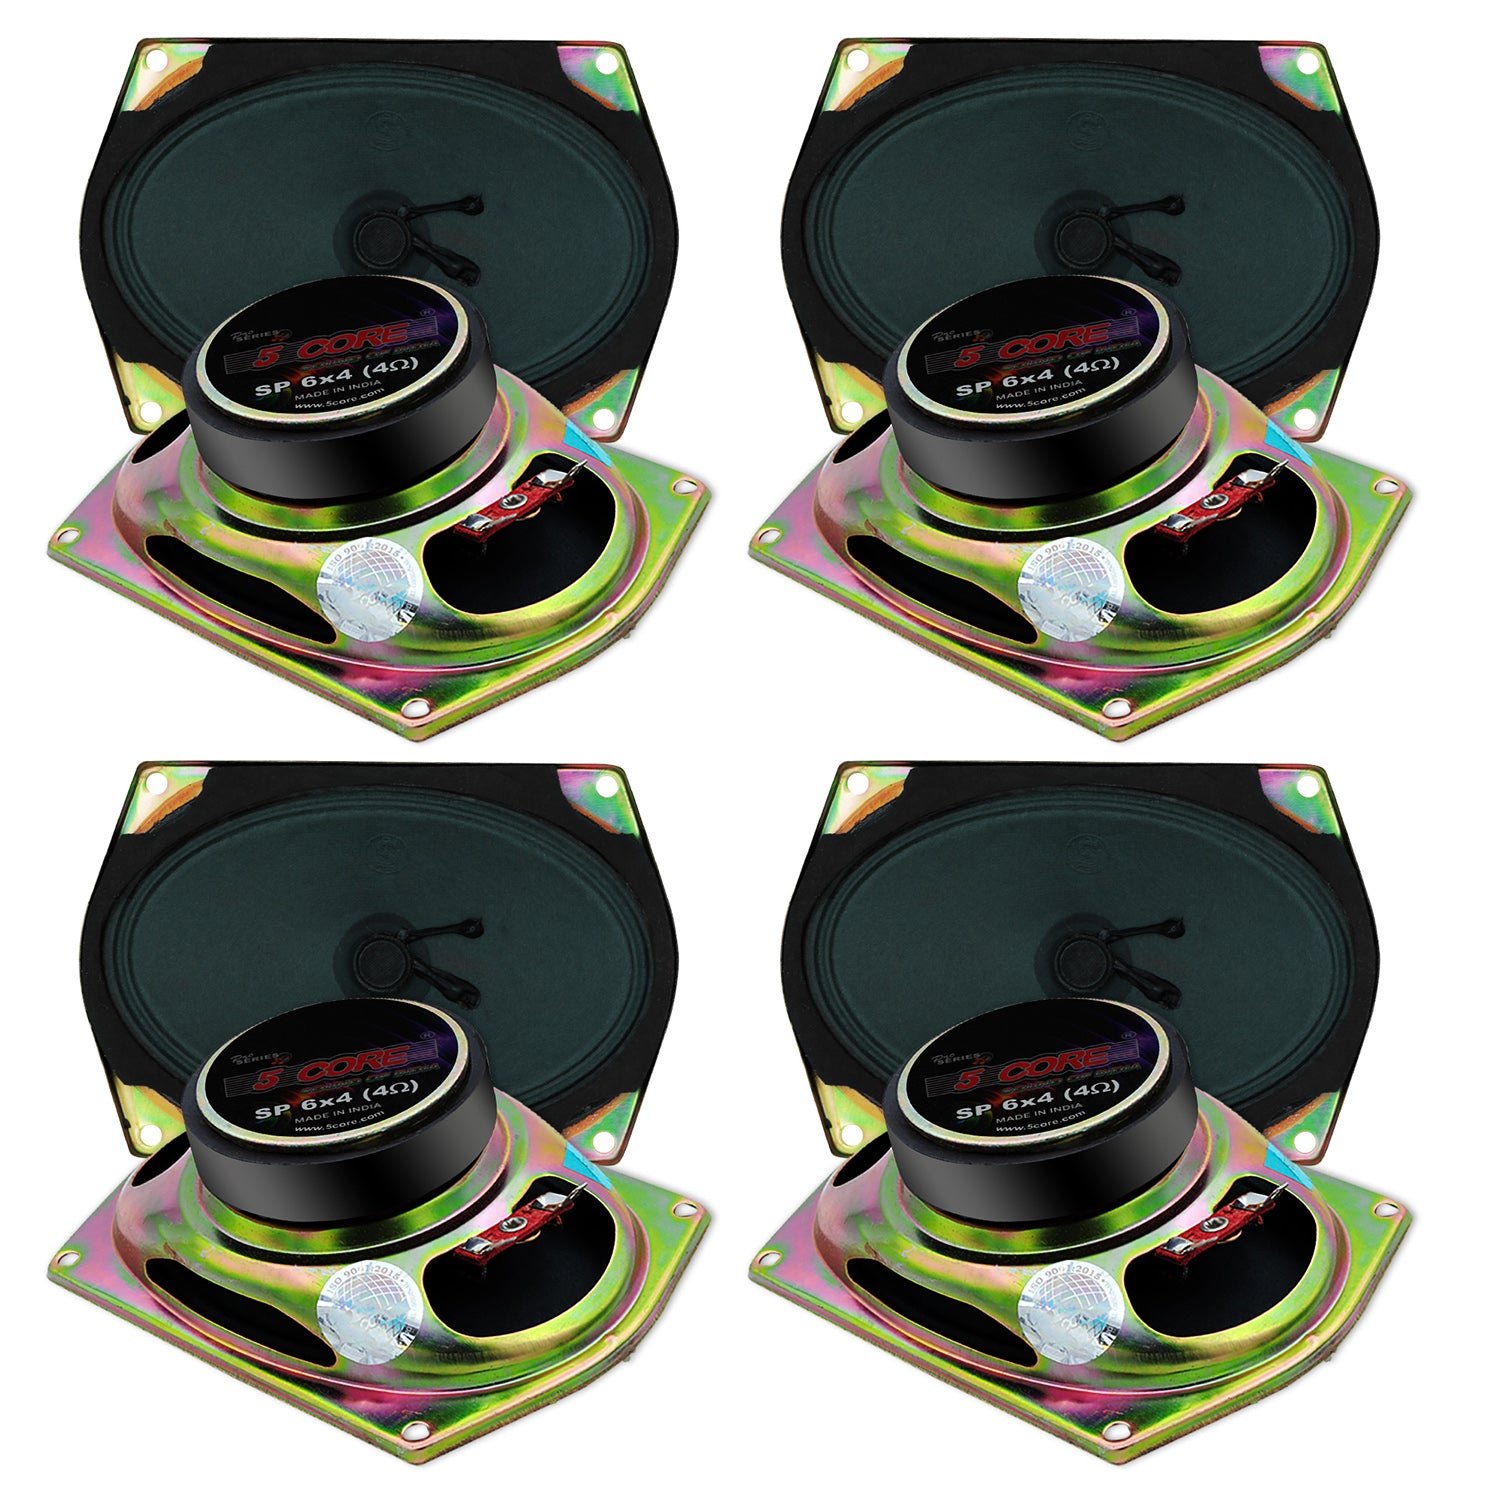 5 Core 6x4 Inch Subwoofer 4 Pack • 200W Peak 4 Ohm Replacement Car Bass Sub Woofer • 1.5" Voice Coil